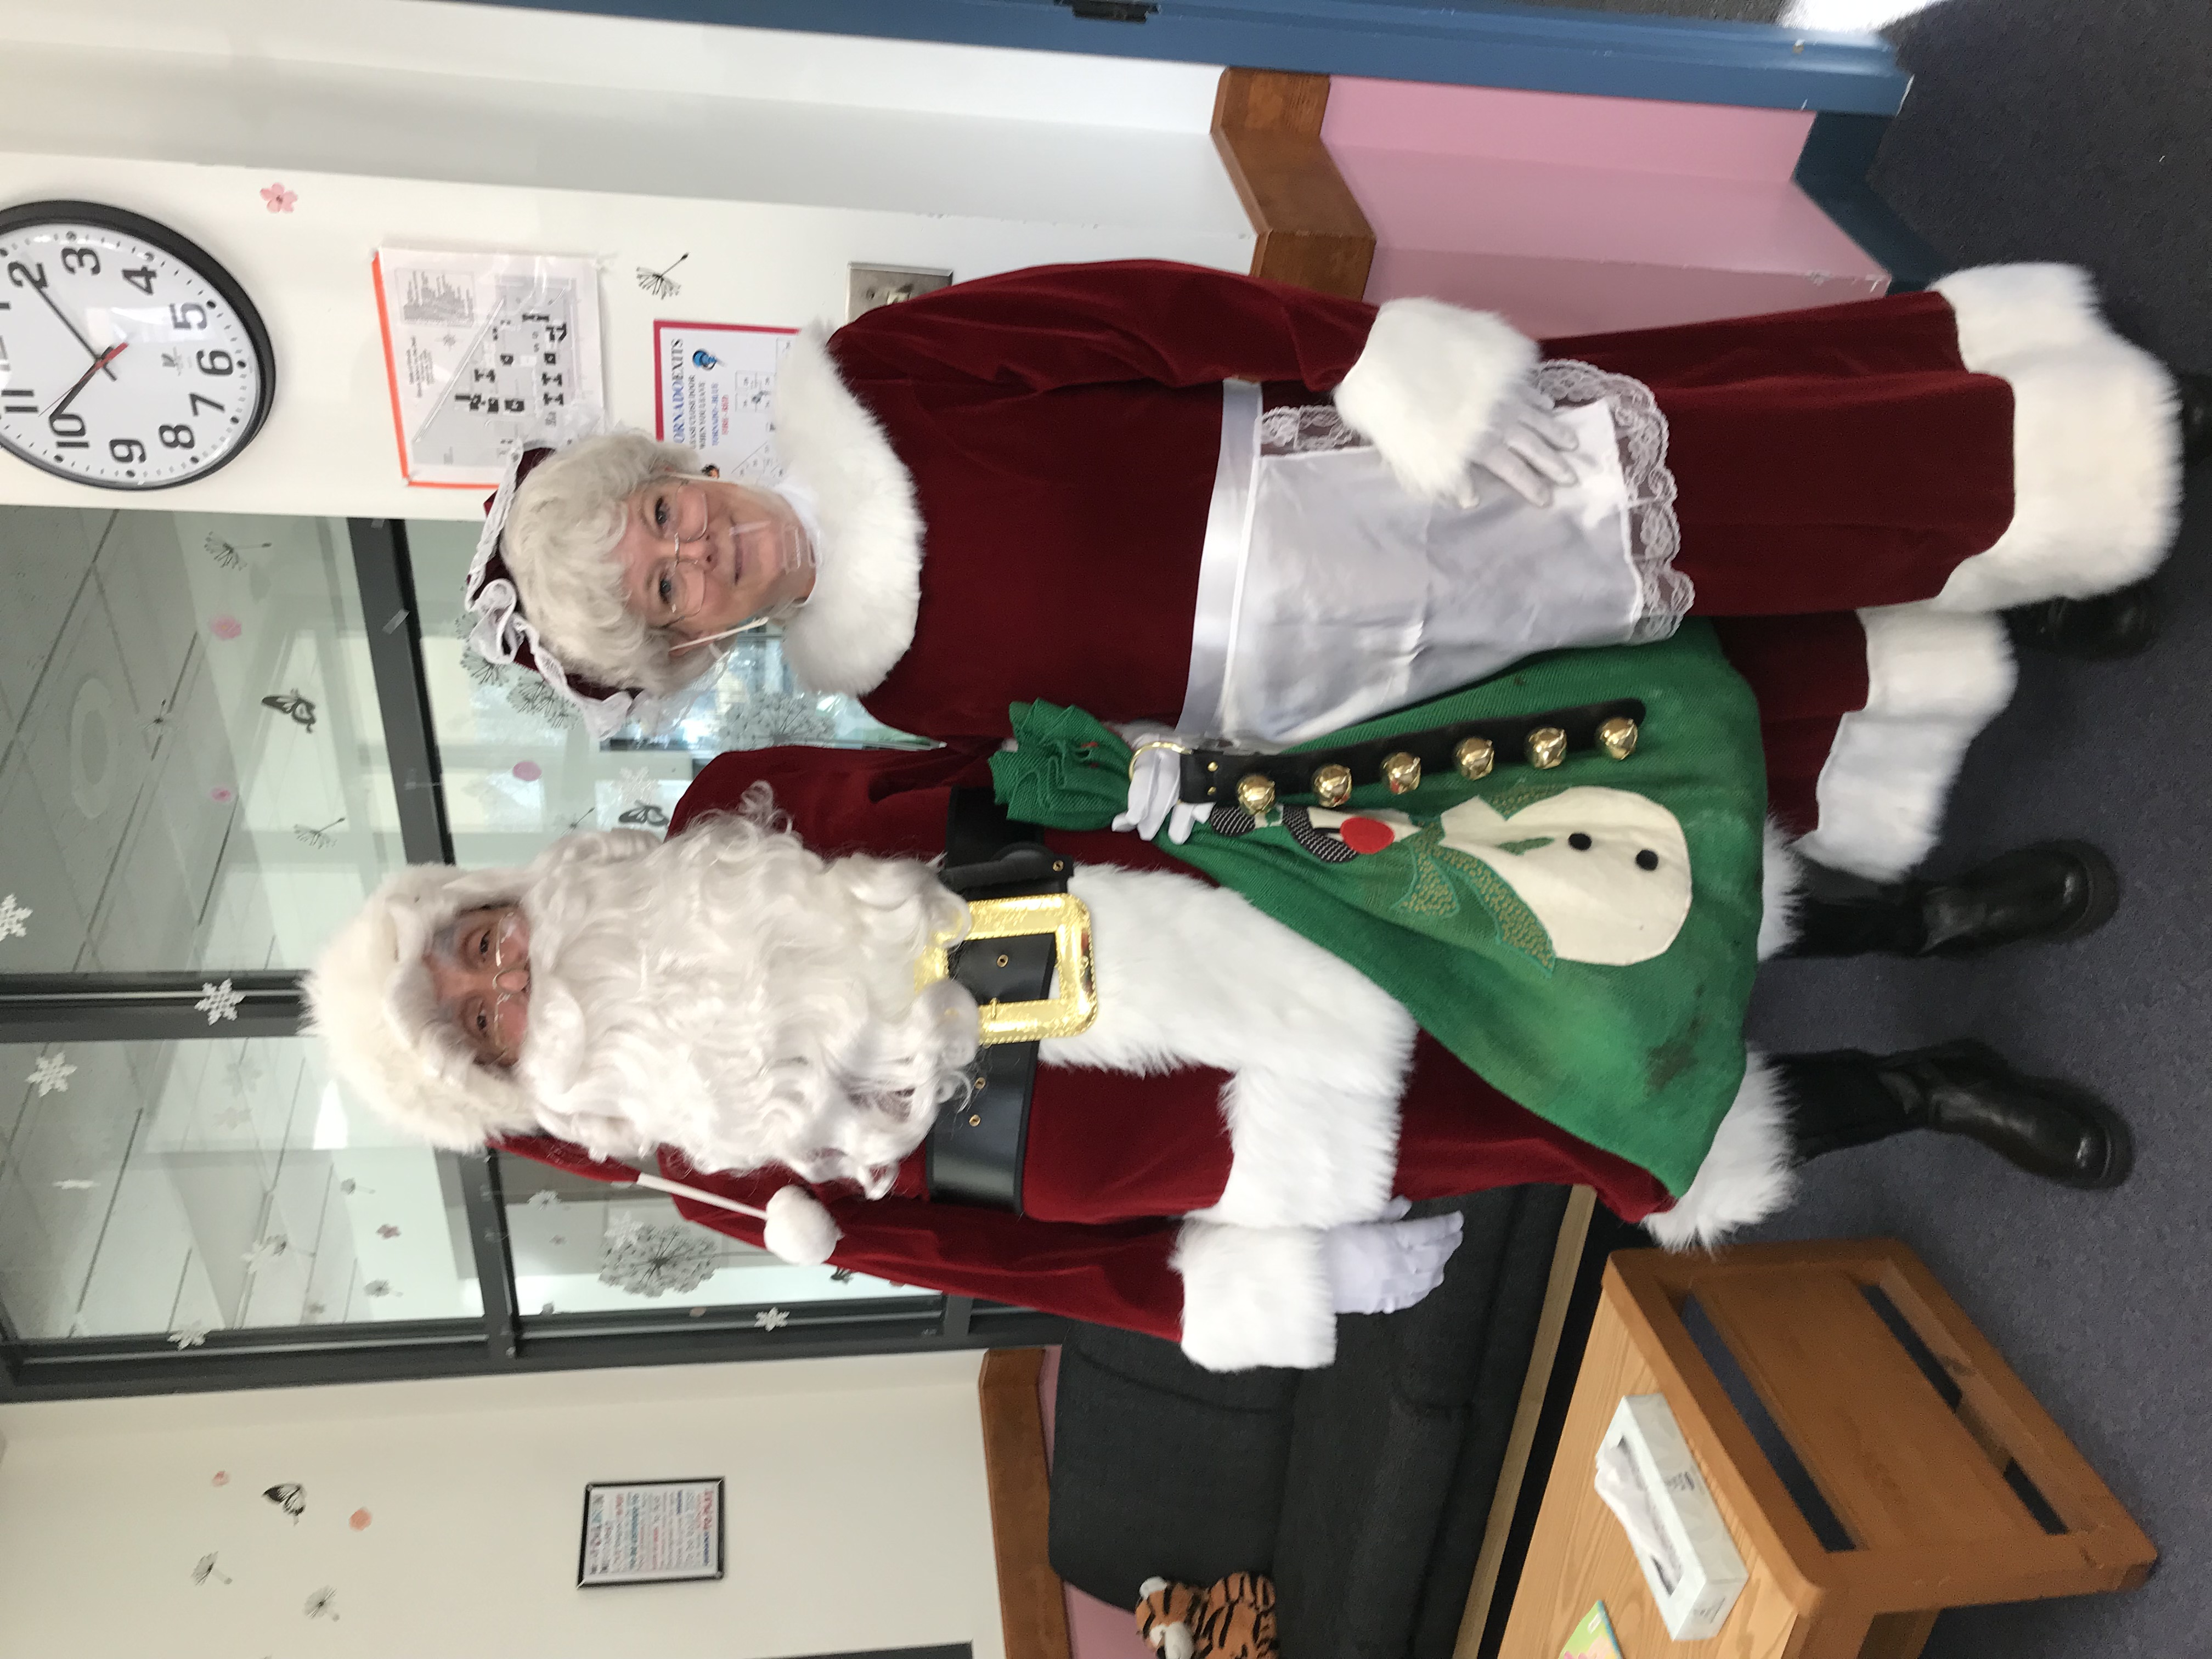 Mr. & Mrs. Claus came to visit students at ISD!